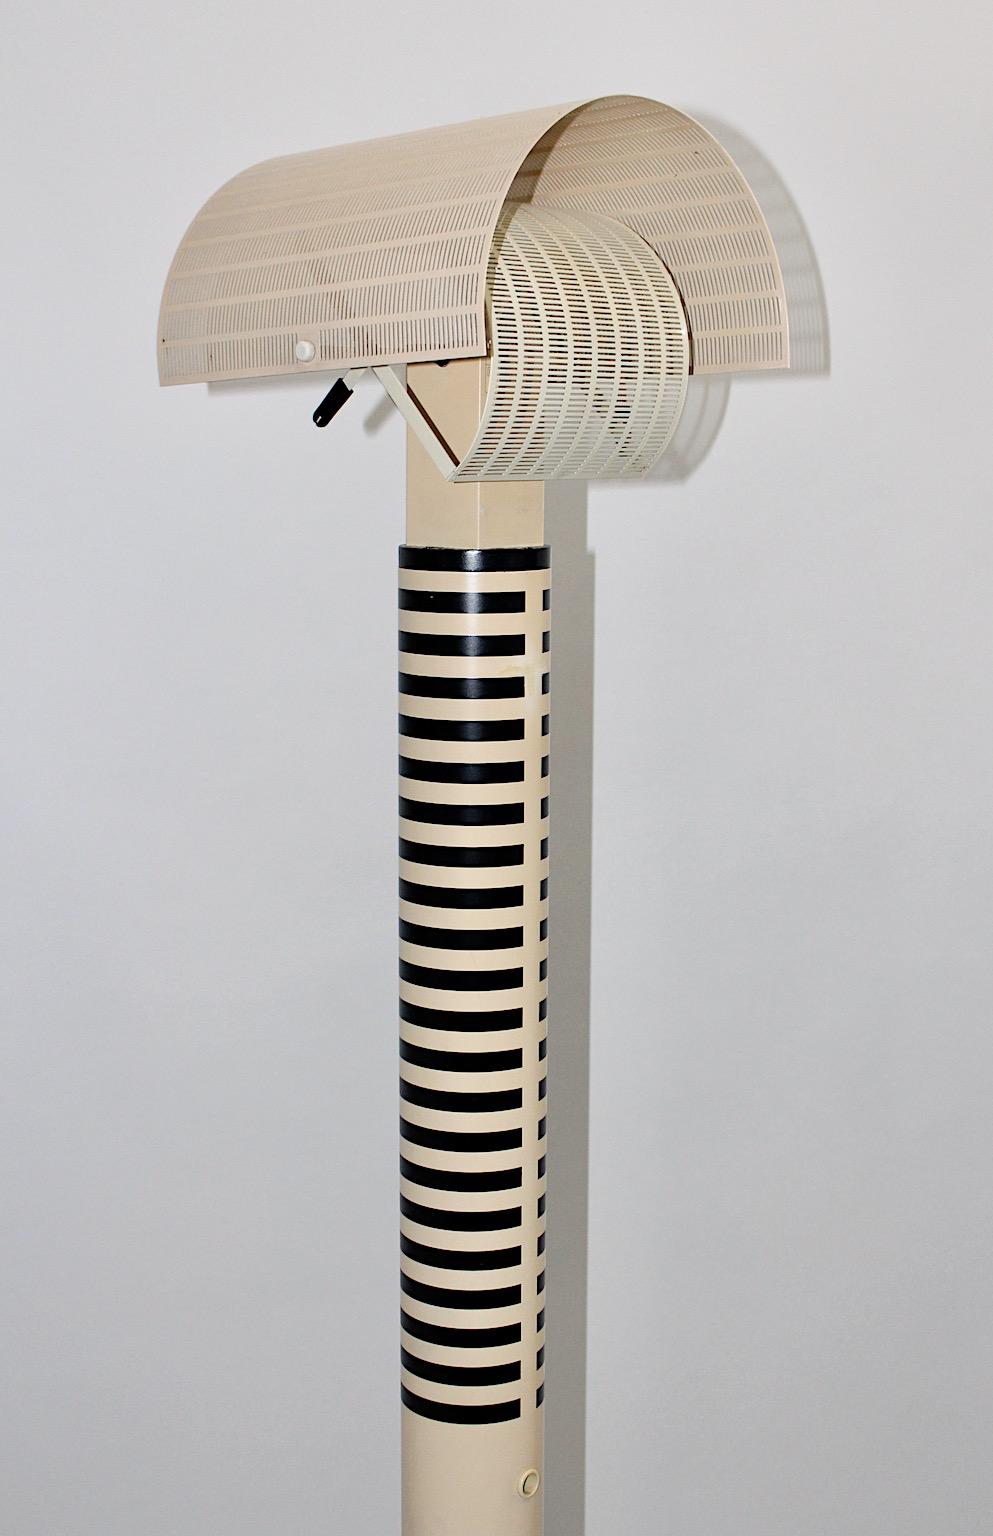 Modern vintage floor lamp designed by Mario Botta 1980s for Artemide Italy from ivory and black striped aluminum and tubular steel.
The gorgeous construction shows geometric elements, which the designer Mario Botta loves to integrate in his